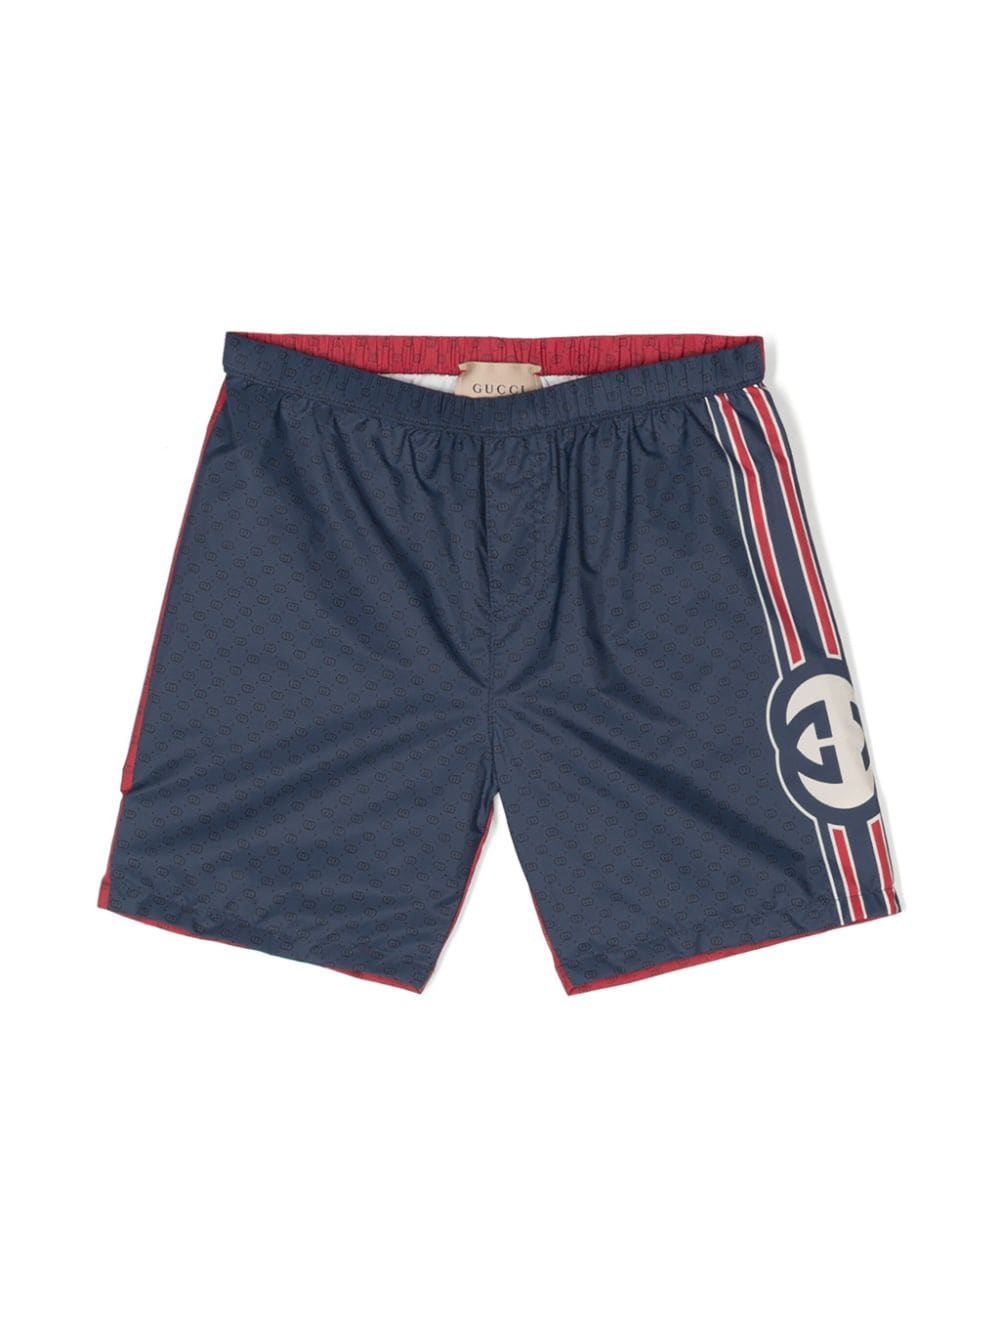 Blue and red nylon baby boy GUCCI swimshorts